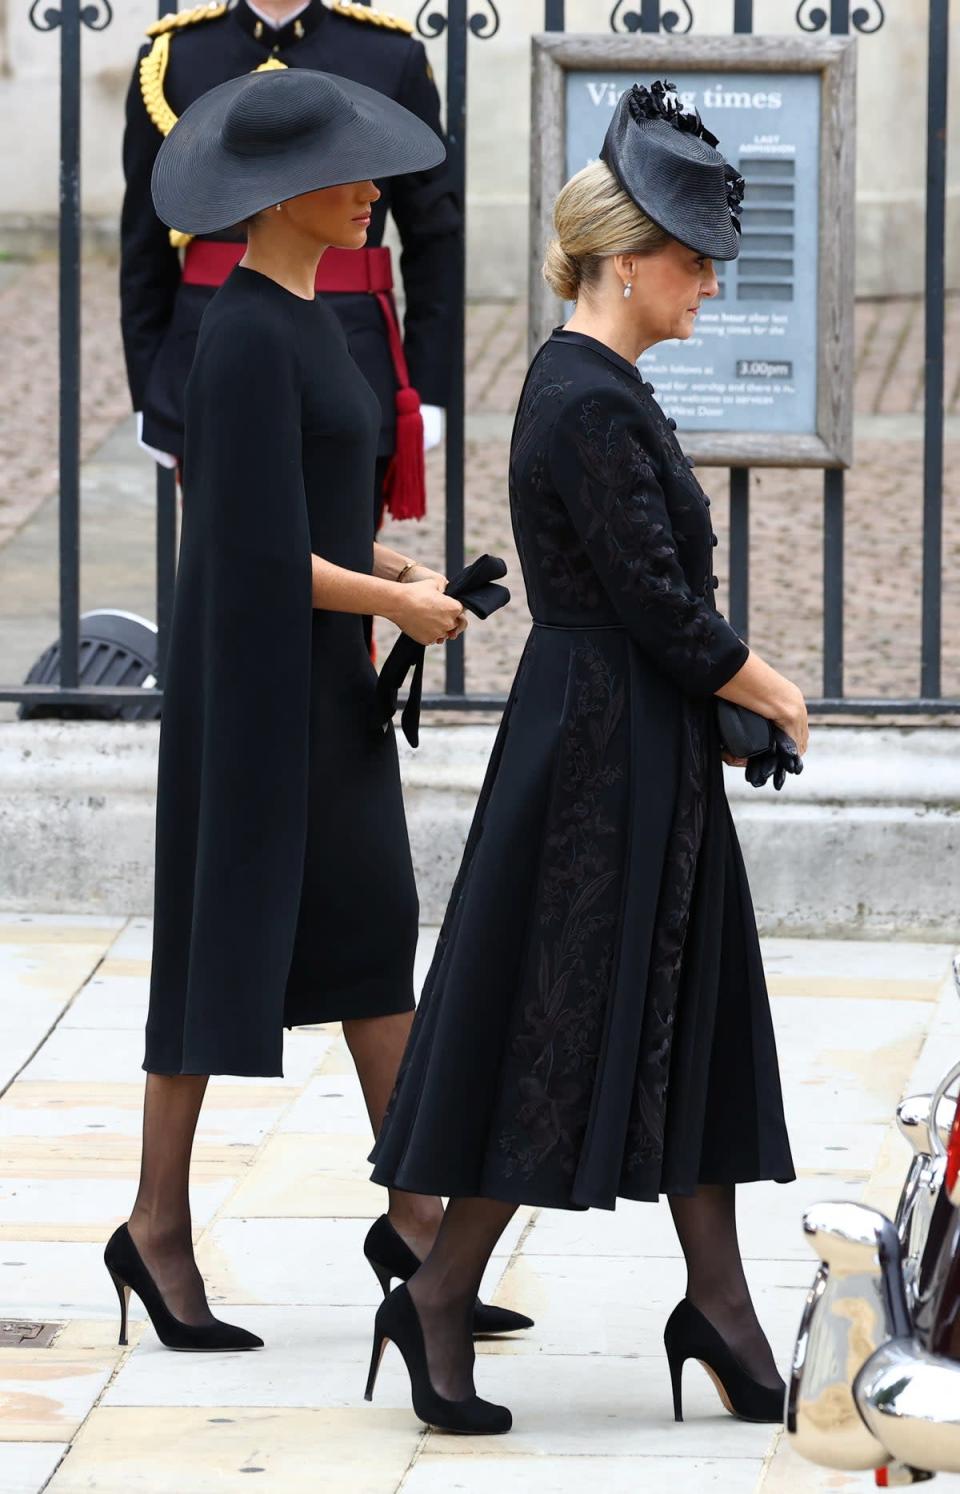 Sophie, Countess of Wessex and Meghan, Duchess of Sussex (Getty Images)